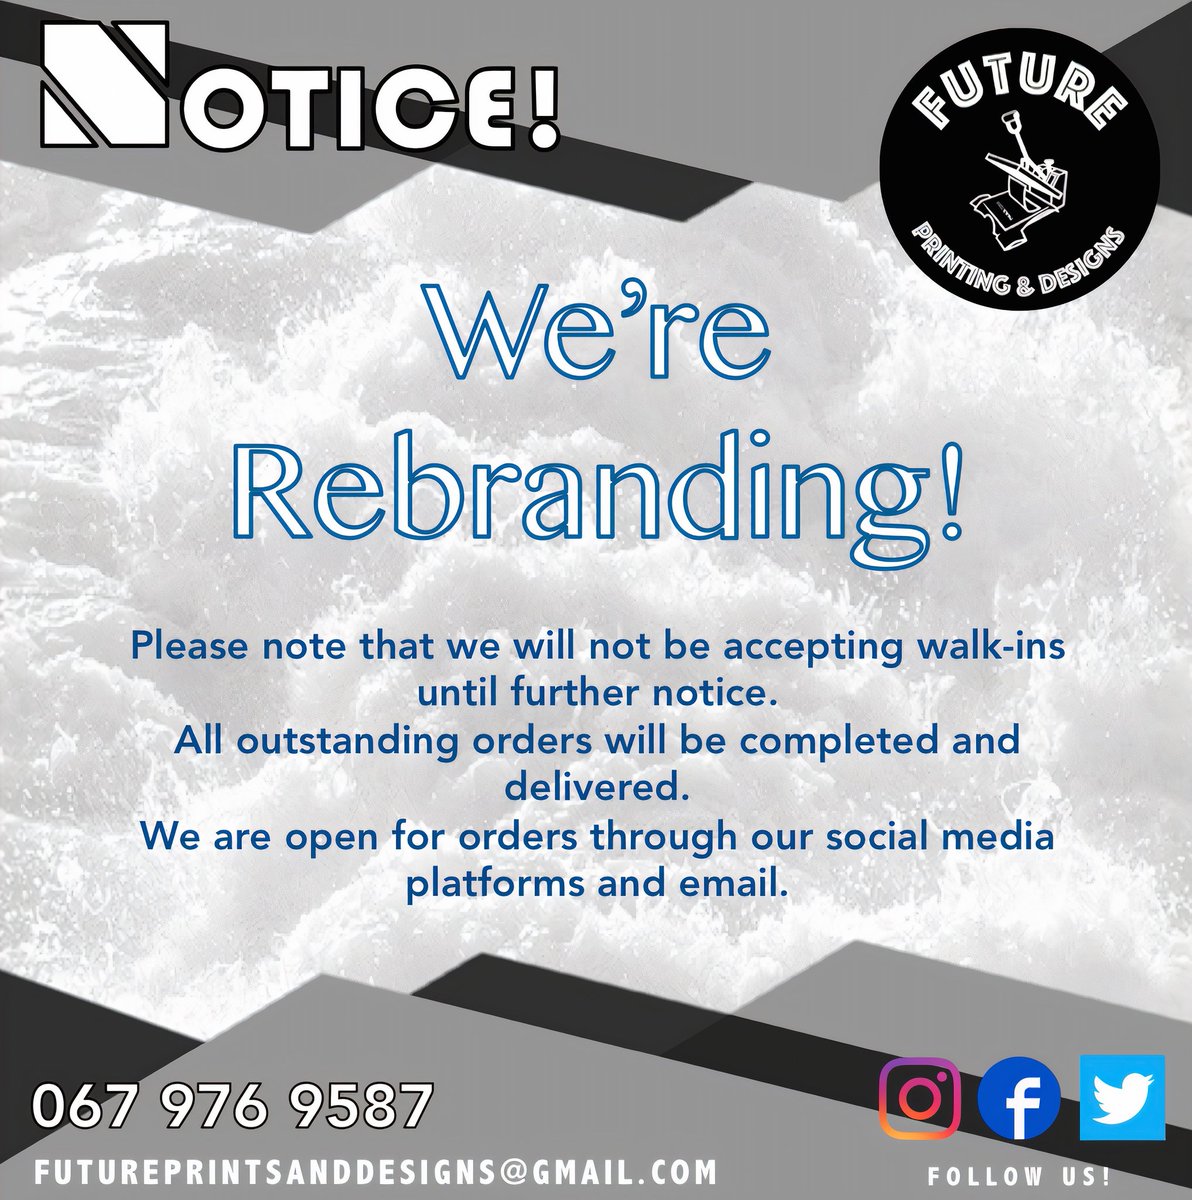 We'll be back before you know it! See you soon! 😉✨️

#futureprintinganddesidns #printing #tshirtprinting #embroidery #DTF #printingsolutions #corporateidentity #banners #brandingsolutions #vinylprinting #sublimationprinting